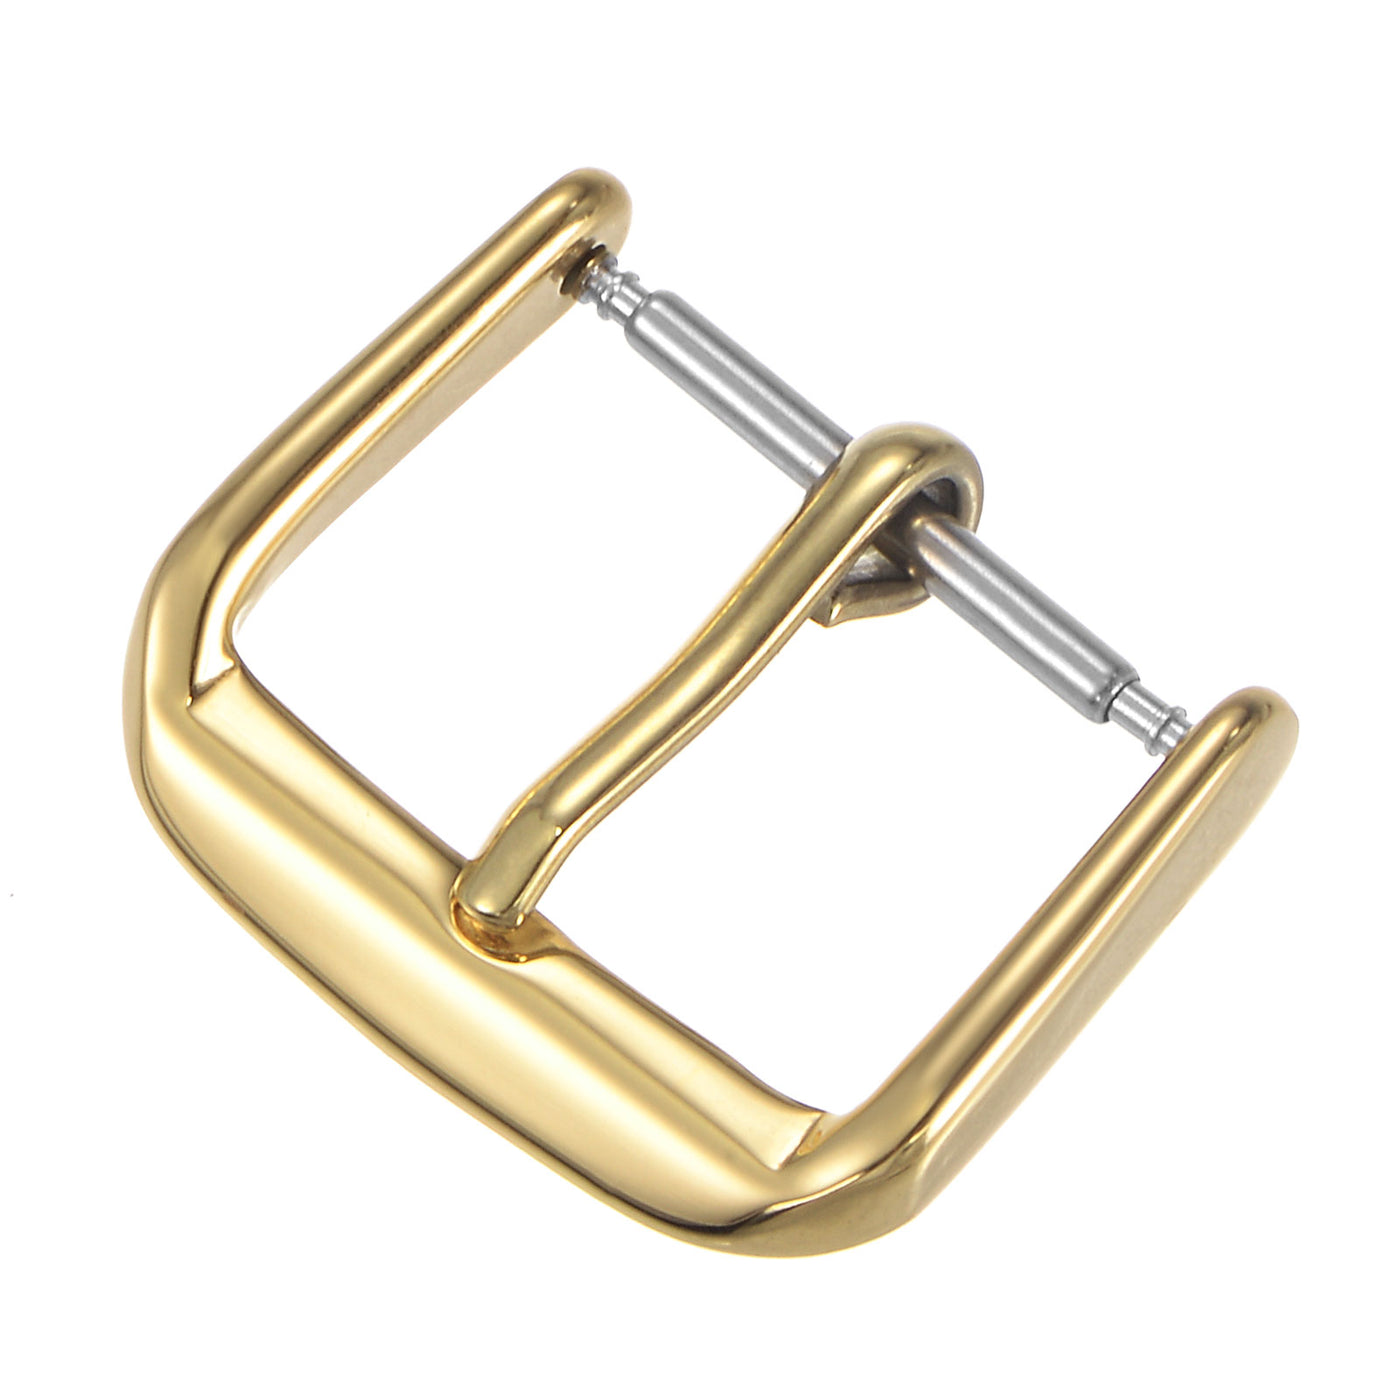 Uxcell Uxcell SUS304 Polished PVD Watch Buckle for 16mm Width Watch Bands Gold Tone